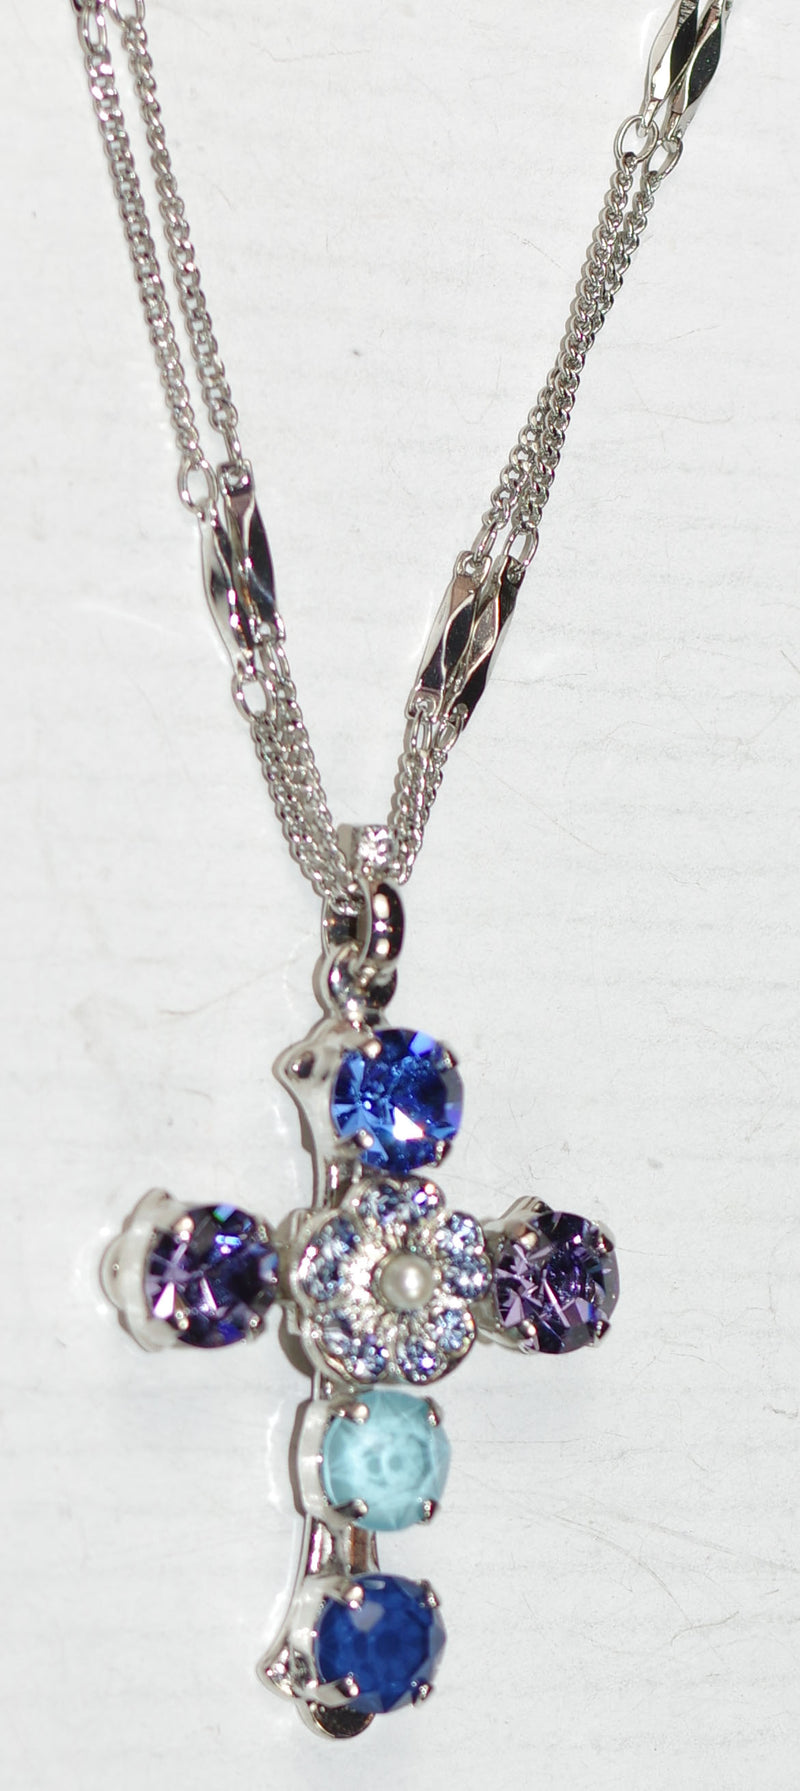 MARIANA CROSS PENDANT ELECTRIC BLUE: blue, teal, purple, pearl stones in silver rhodium setting, 20" adjustable double chain